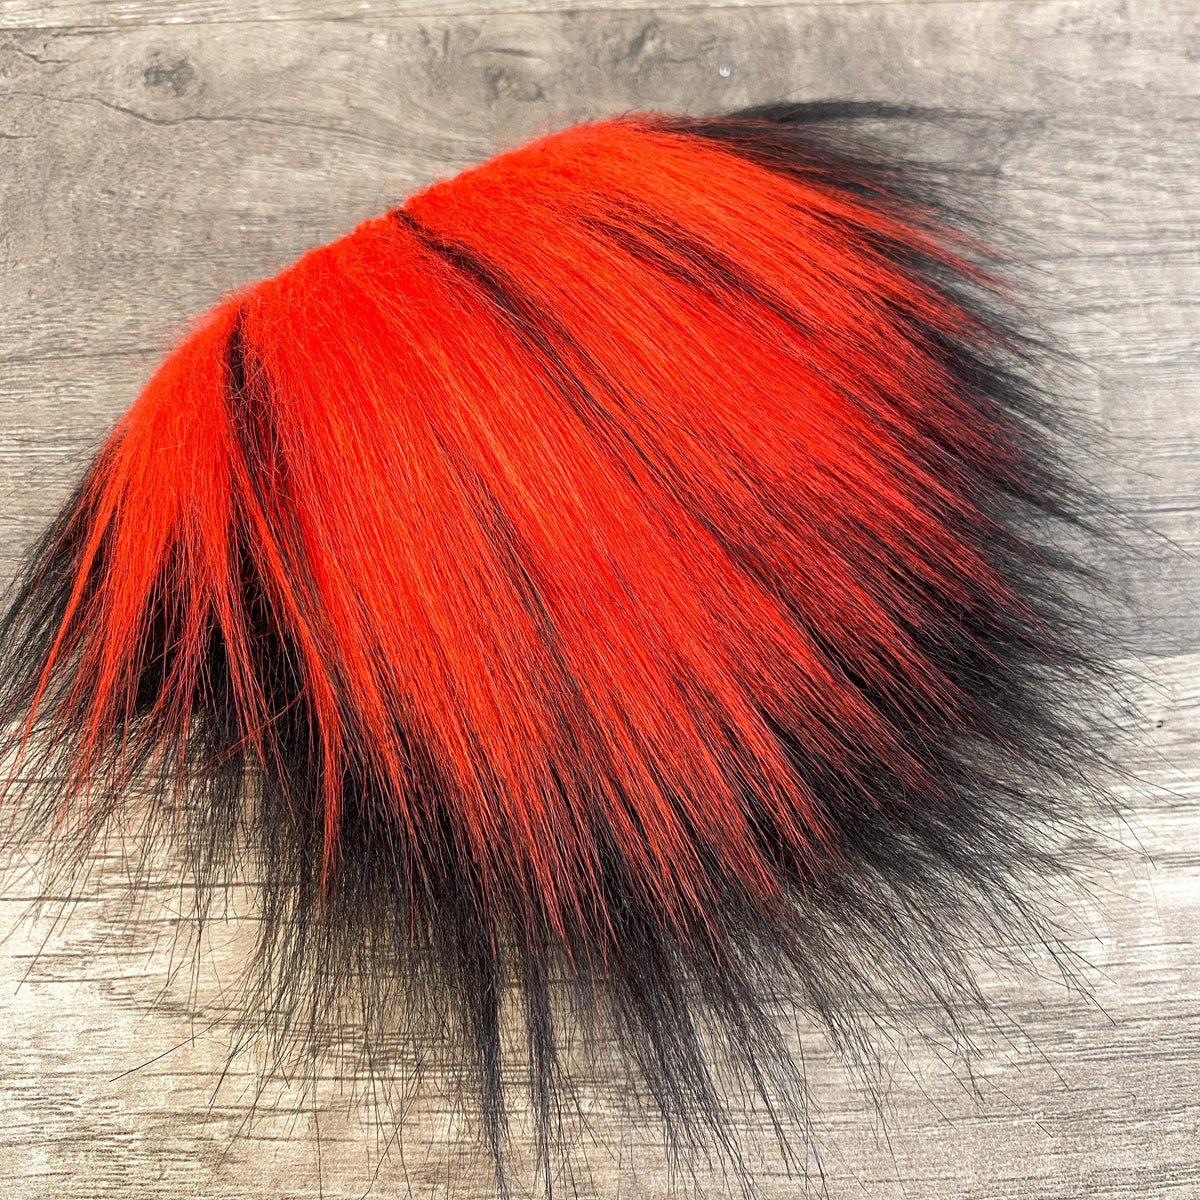 Two Piece Layered Gnome Beard - Black-Tipped Red Over Straight Black